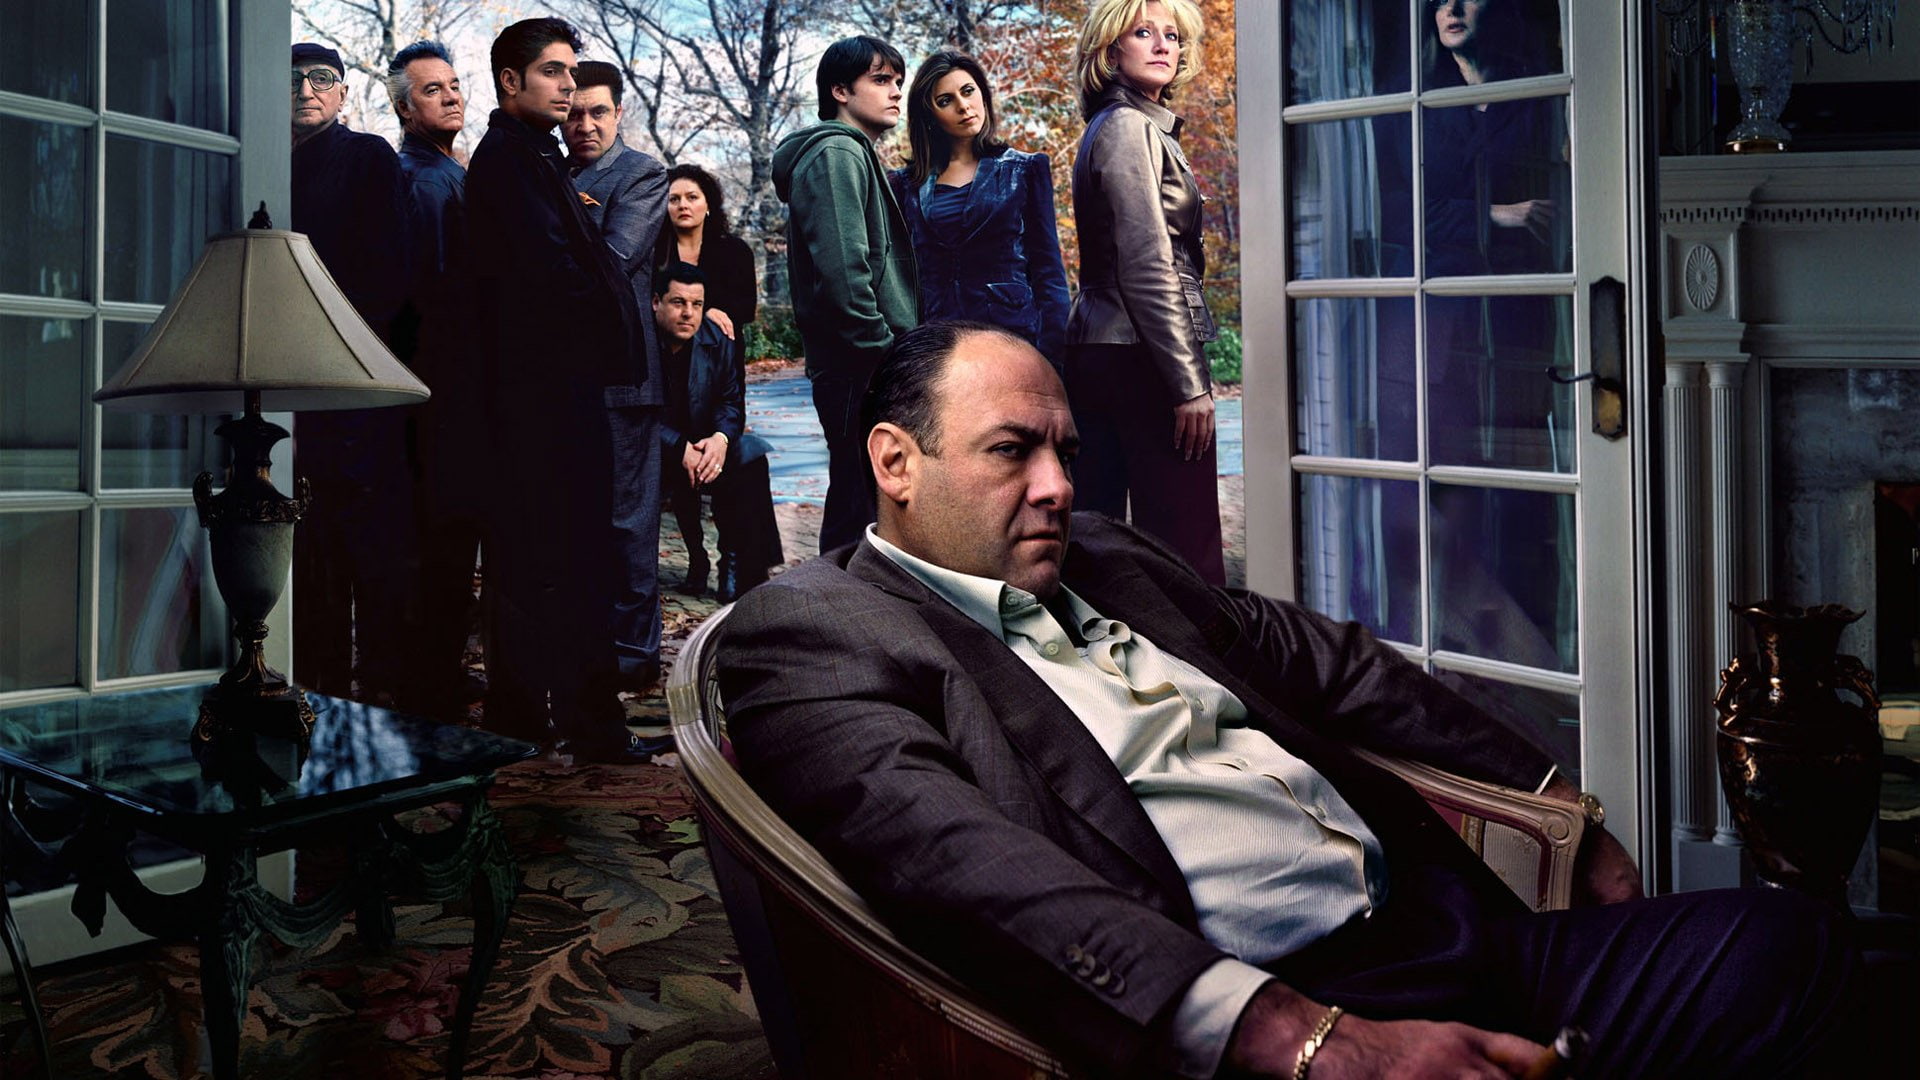 TV Show, The Sopranos, men, males, adult, suit, group of people